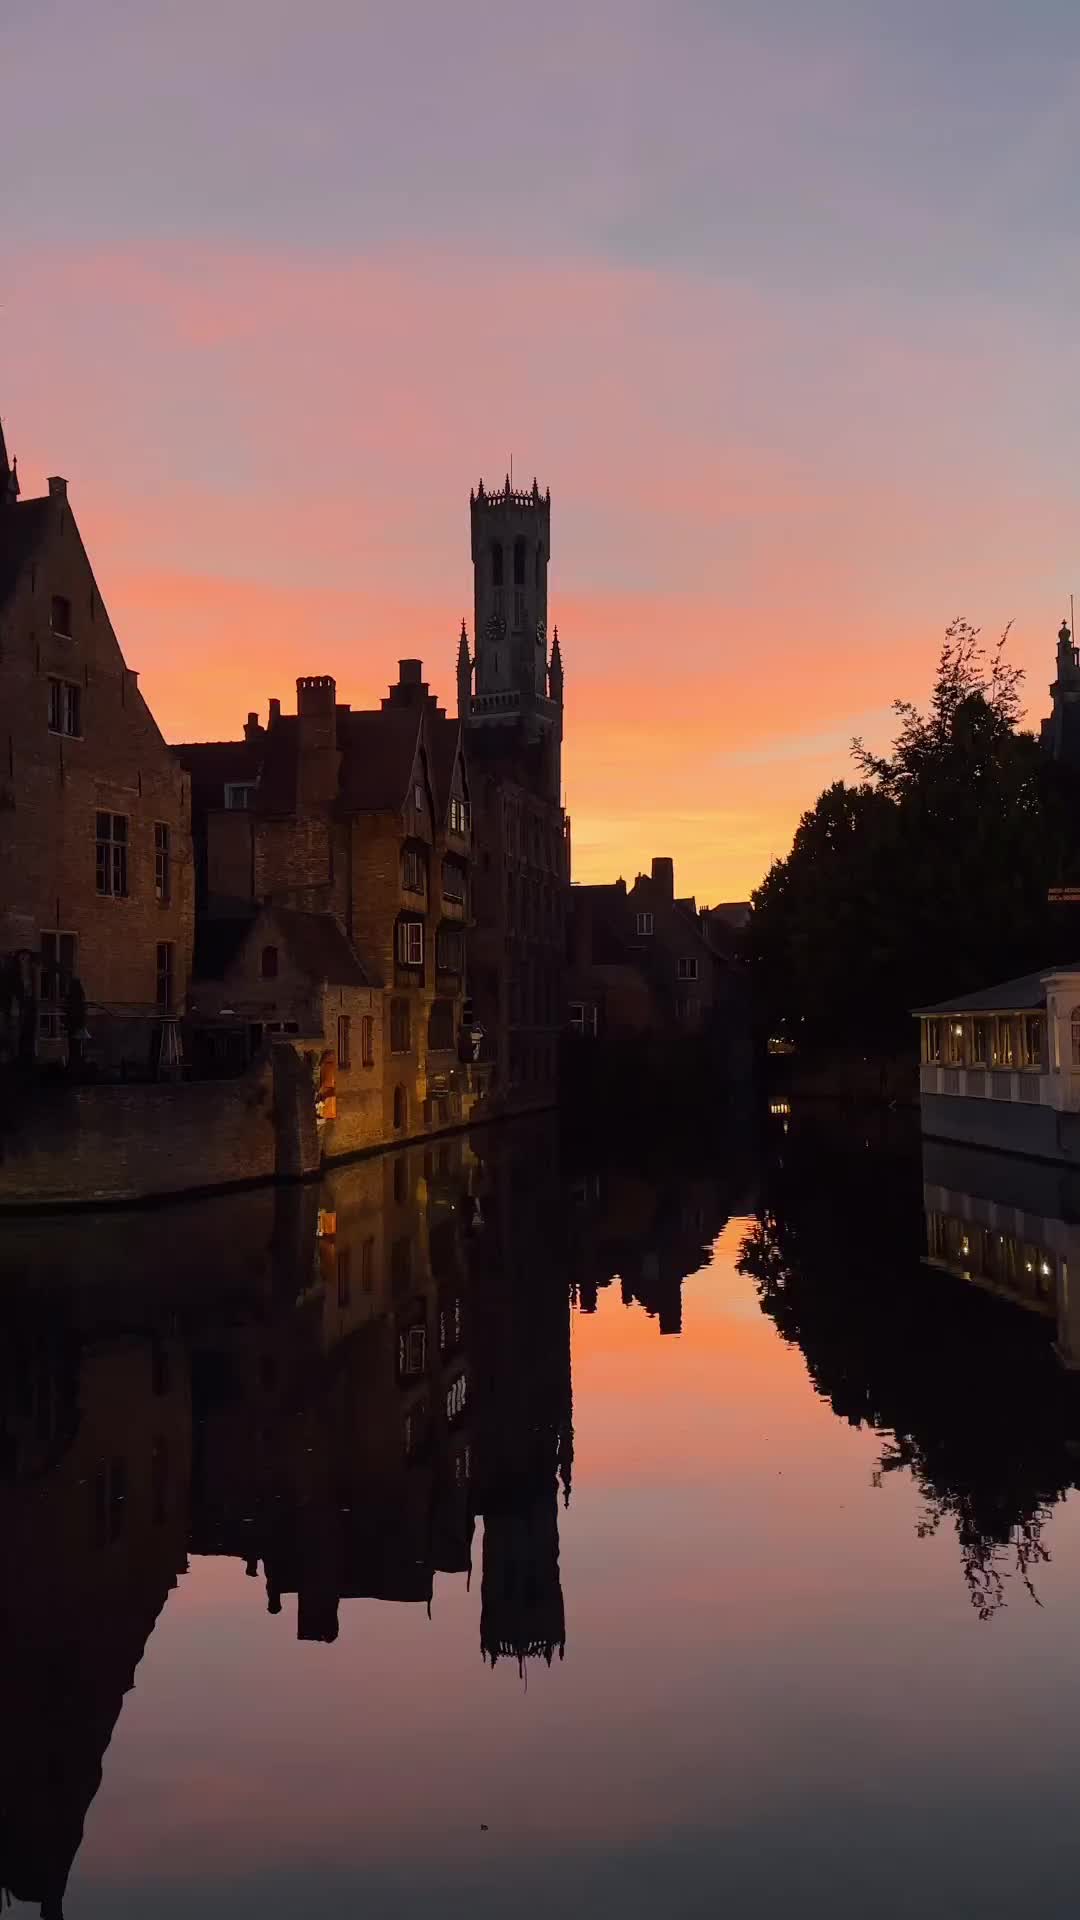 Bruges Nighttime Magic: Gothic Beauty & Golden Reflections